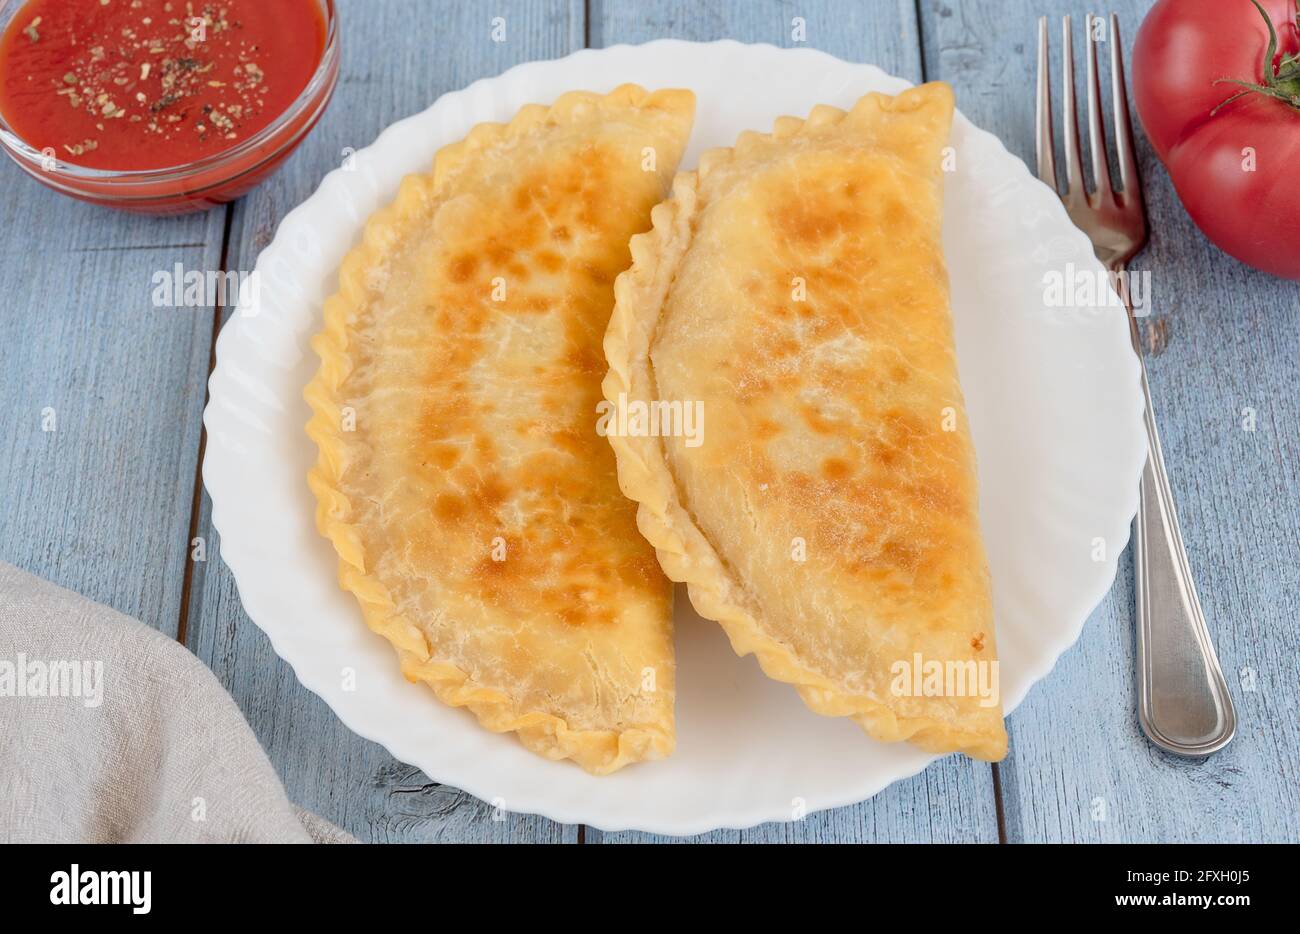 Fried pies with meat - Chebureks in a plate, a bowl with tomato sauce Stock Photo